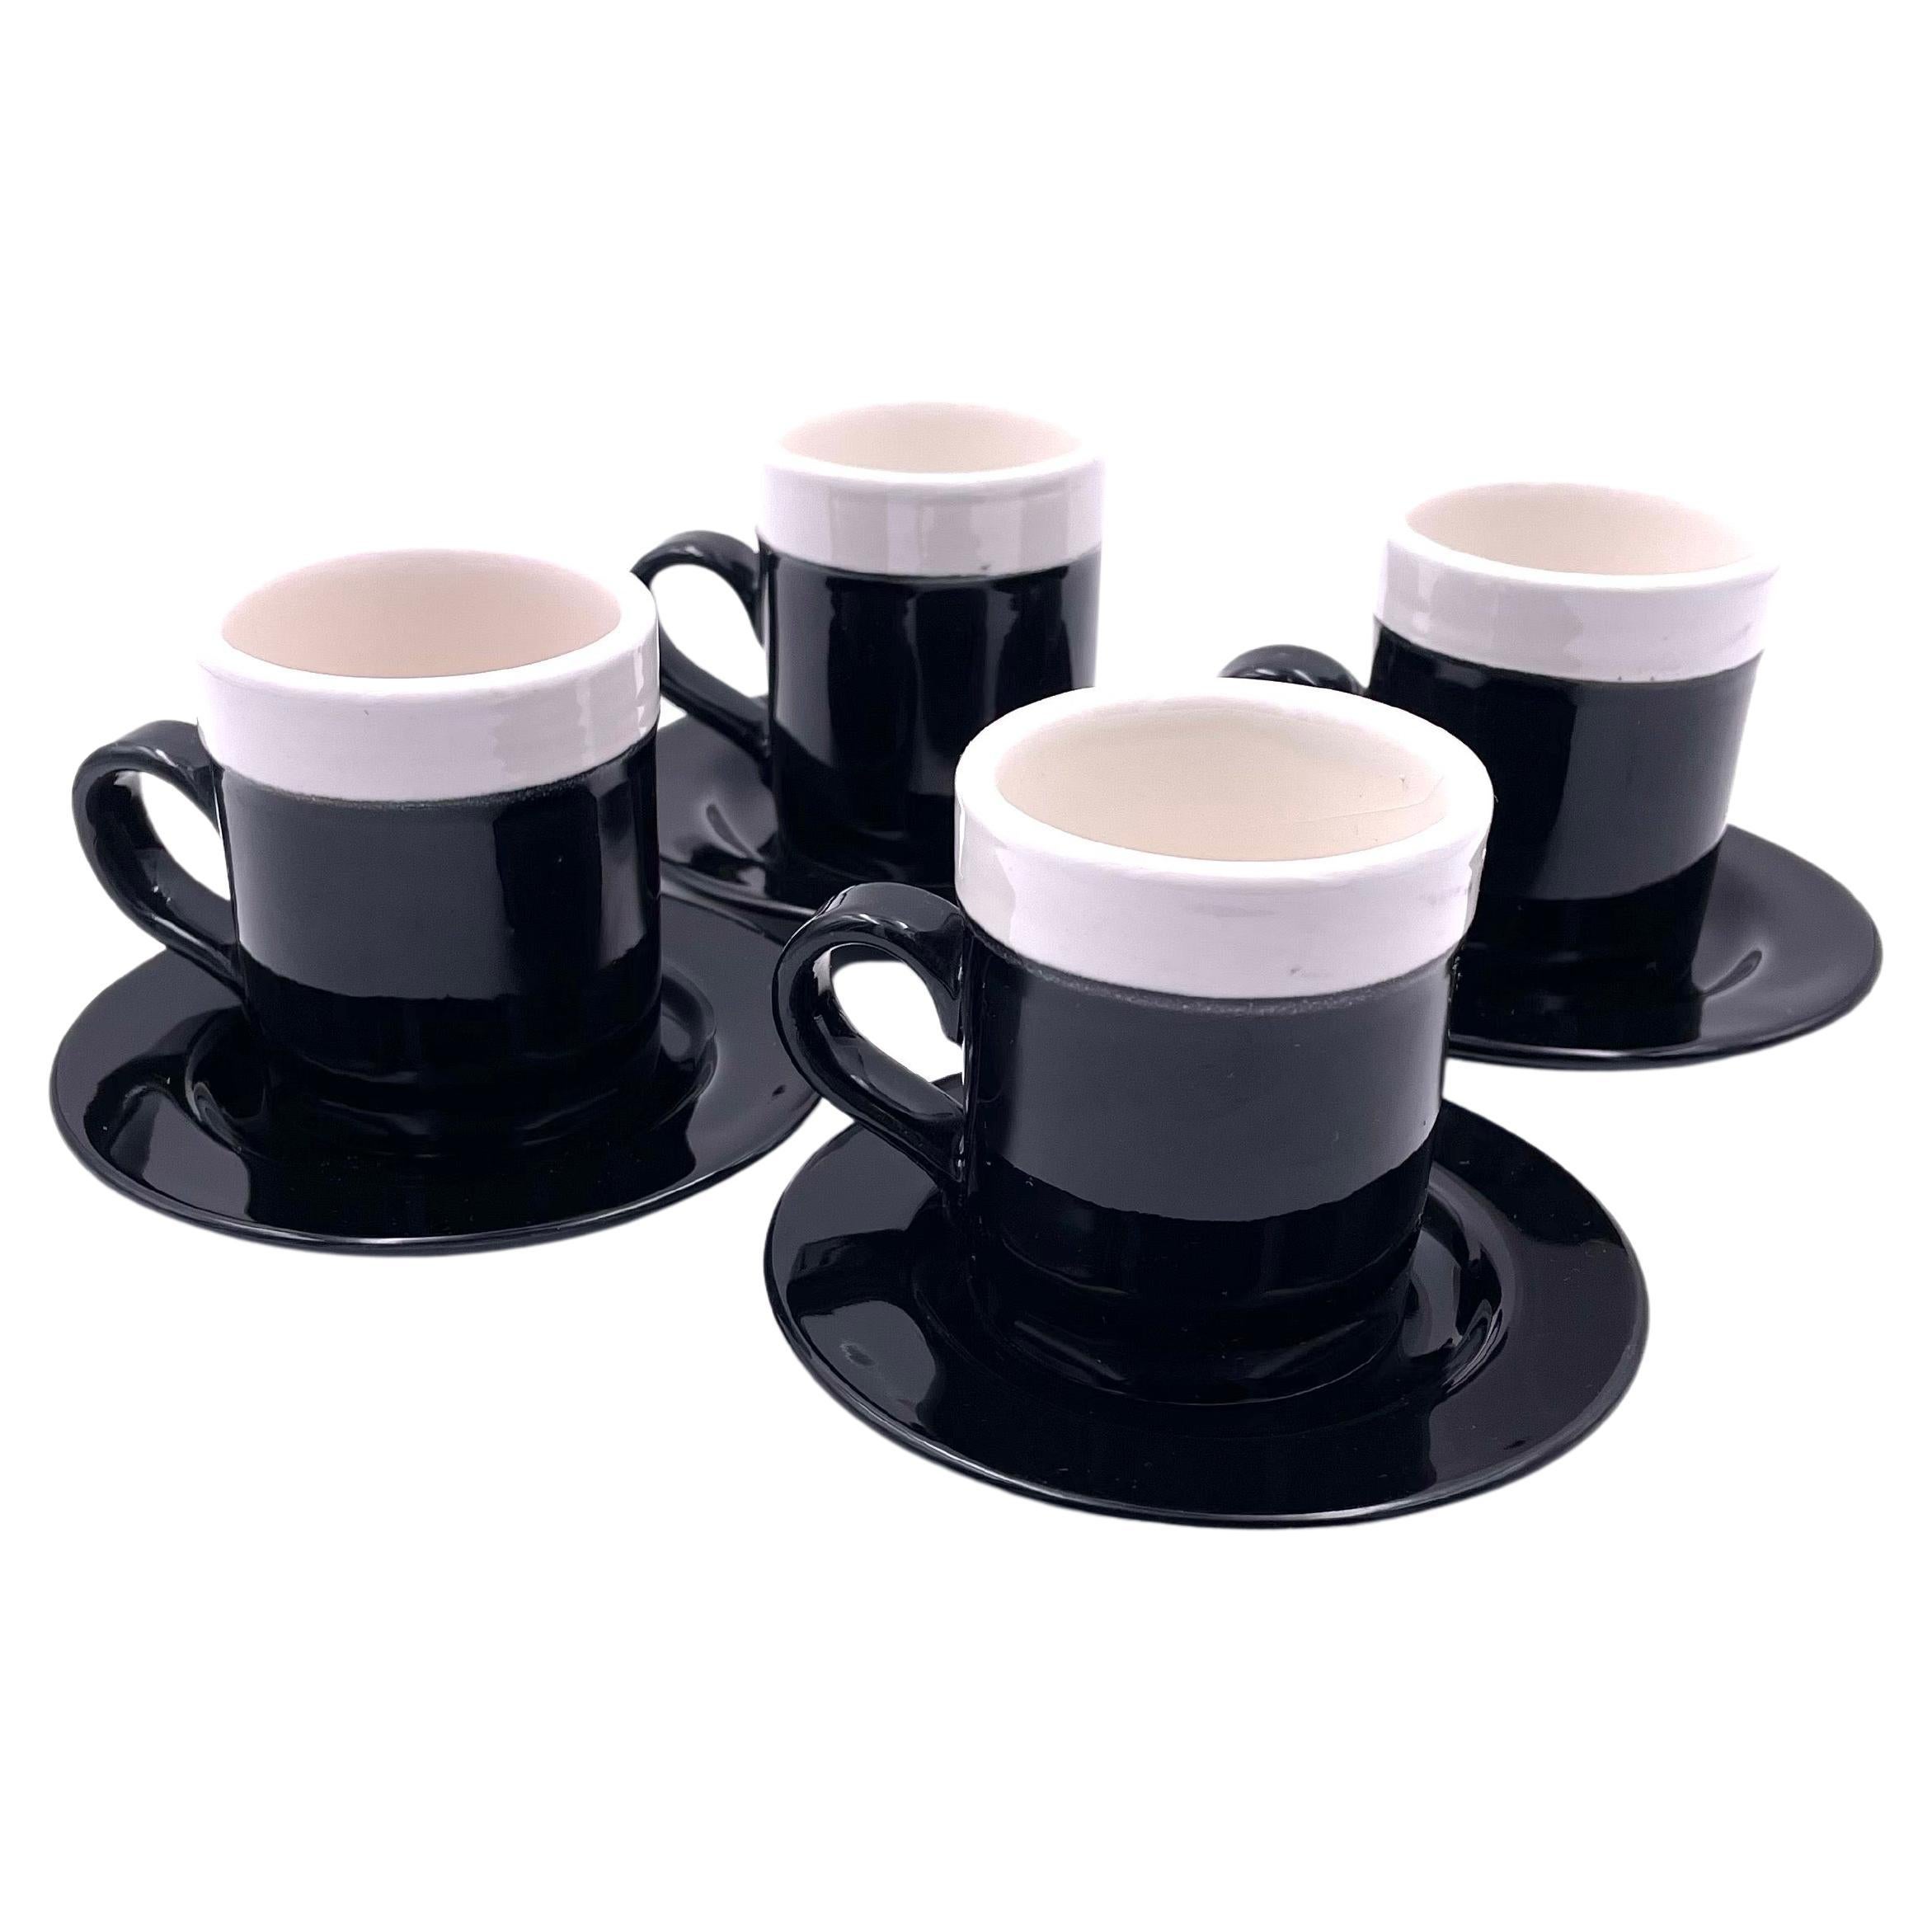 Imported Italian Espresso cup set of 6 by Giannini Retails for $100 